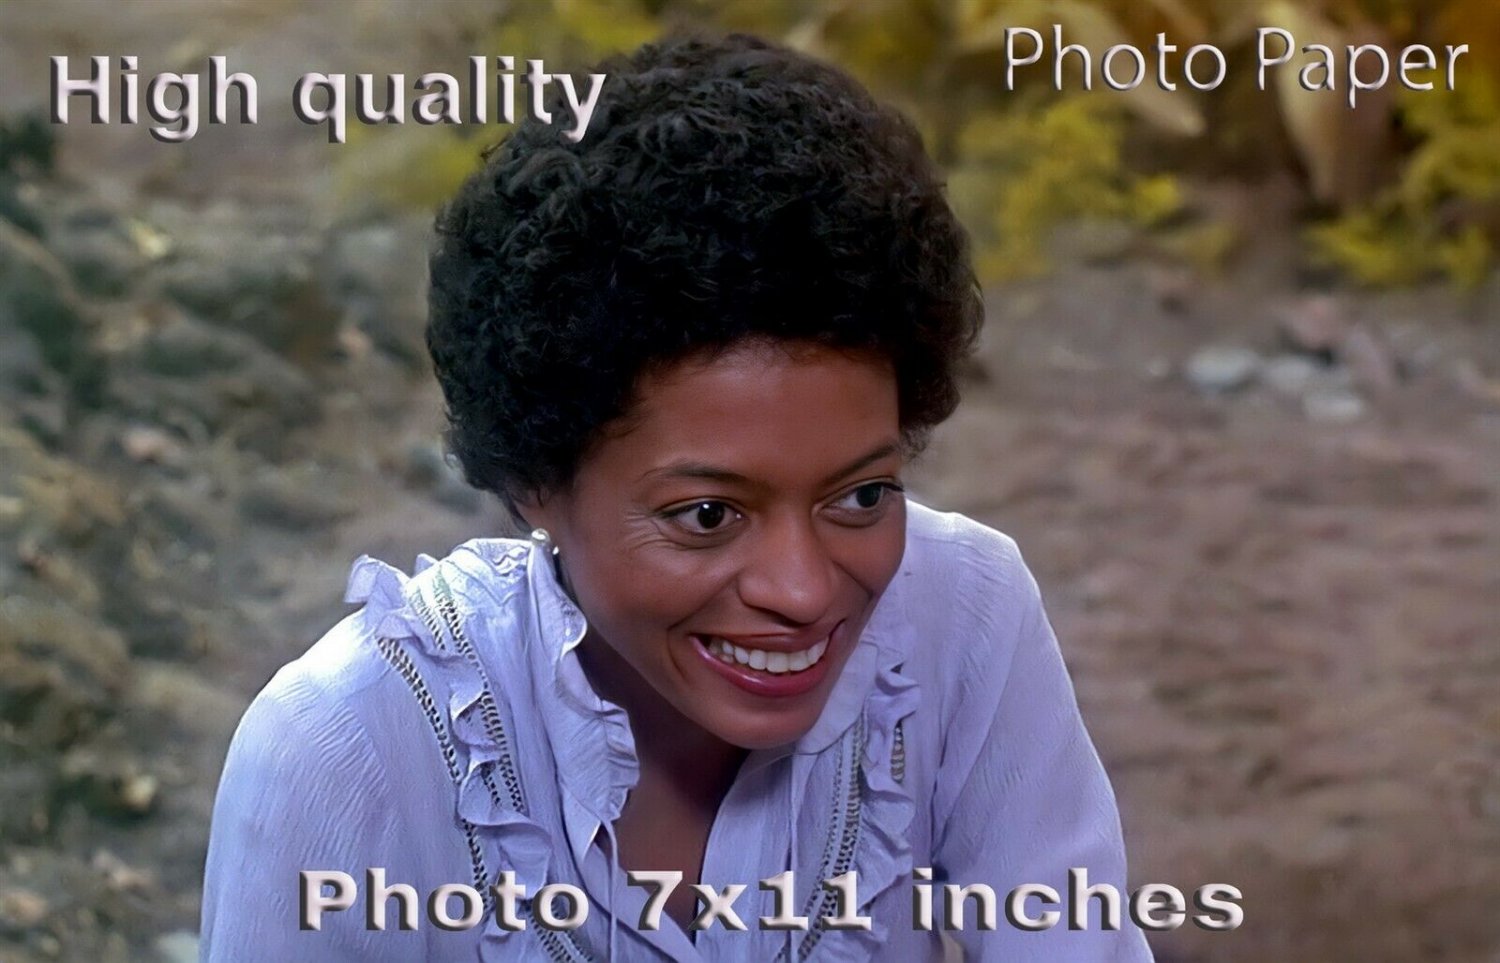 Diana Ross The WIZ PHOTO HQ 11x7 inches #05